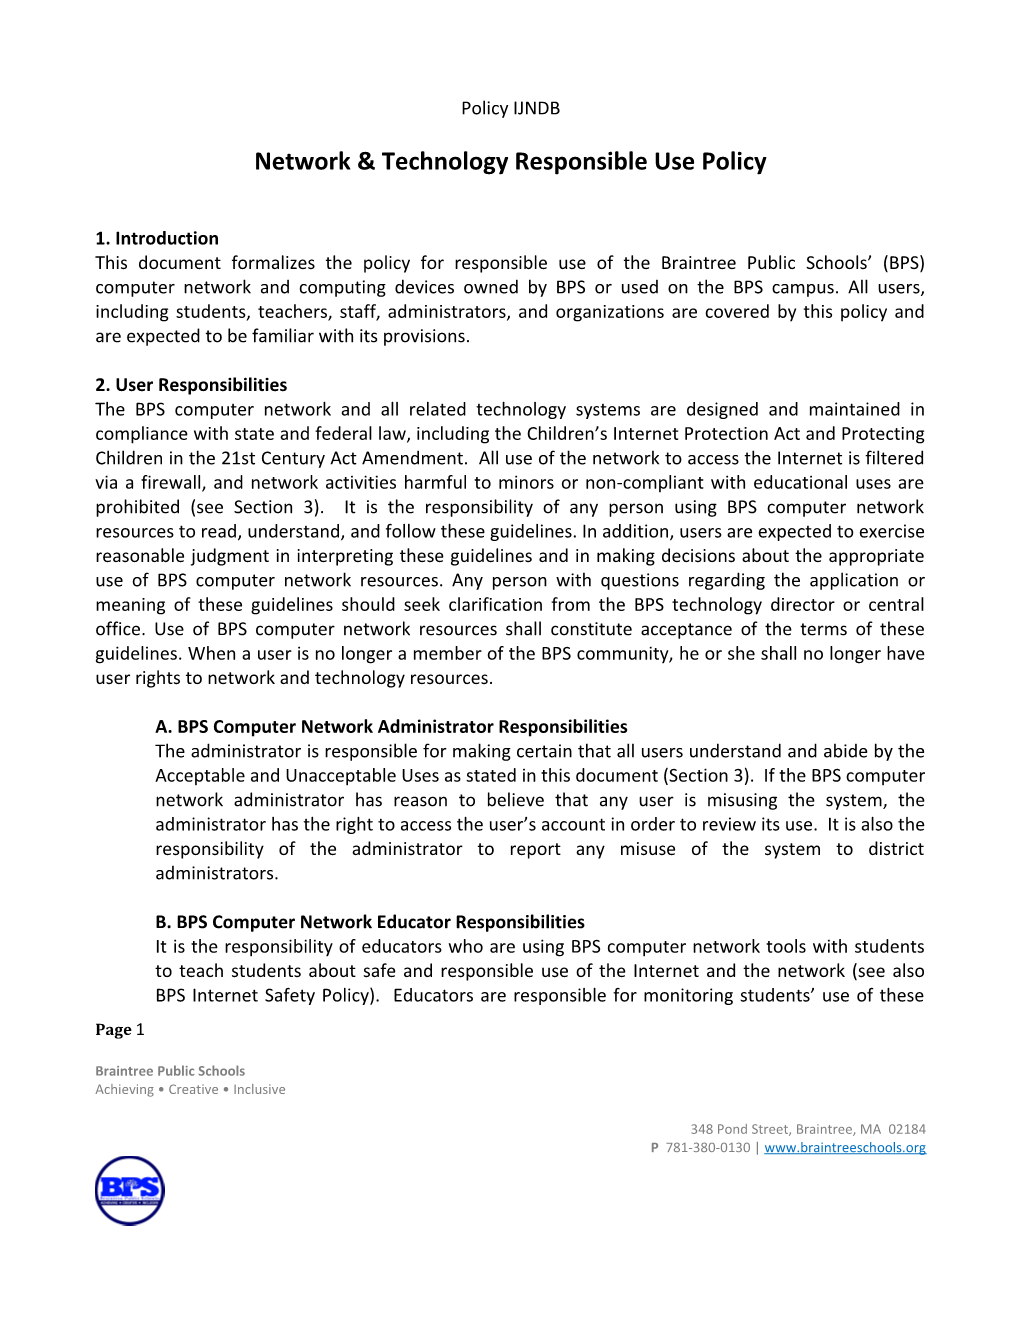 Network & Technology Responsible Use Policy